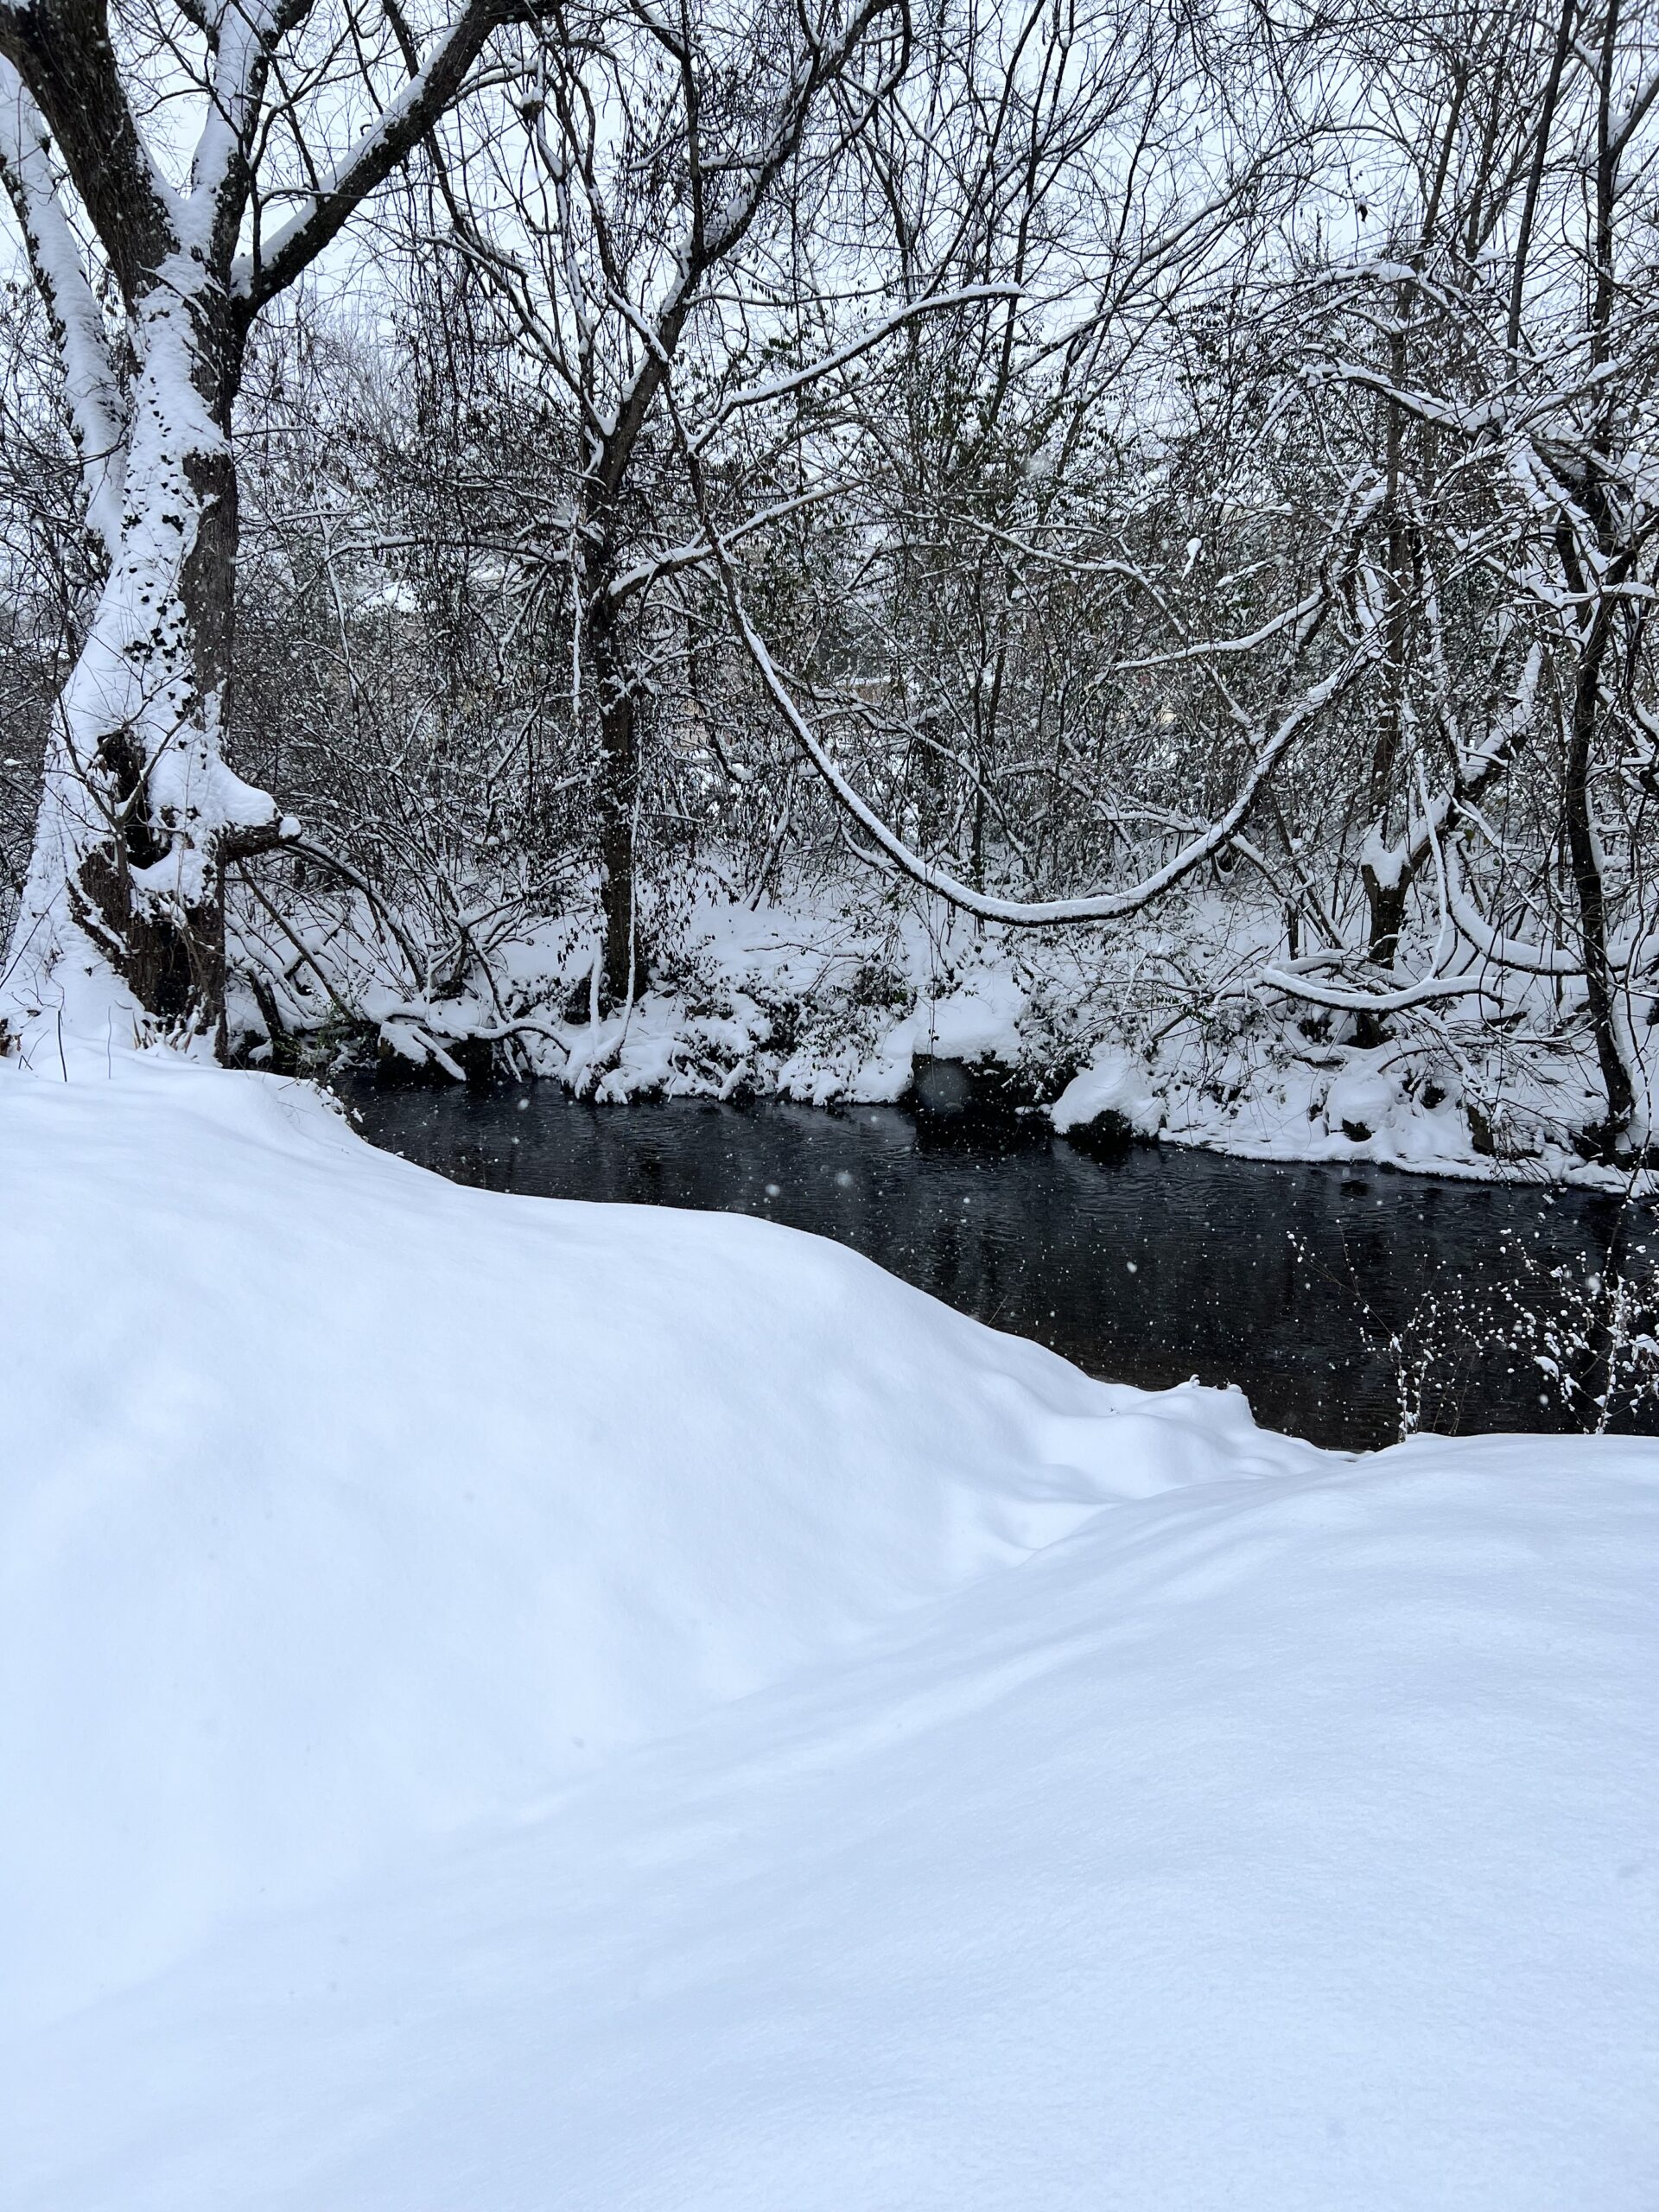 Snow and creek, the kids are all right